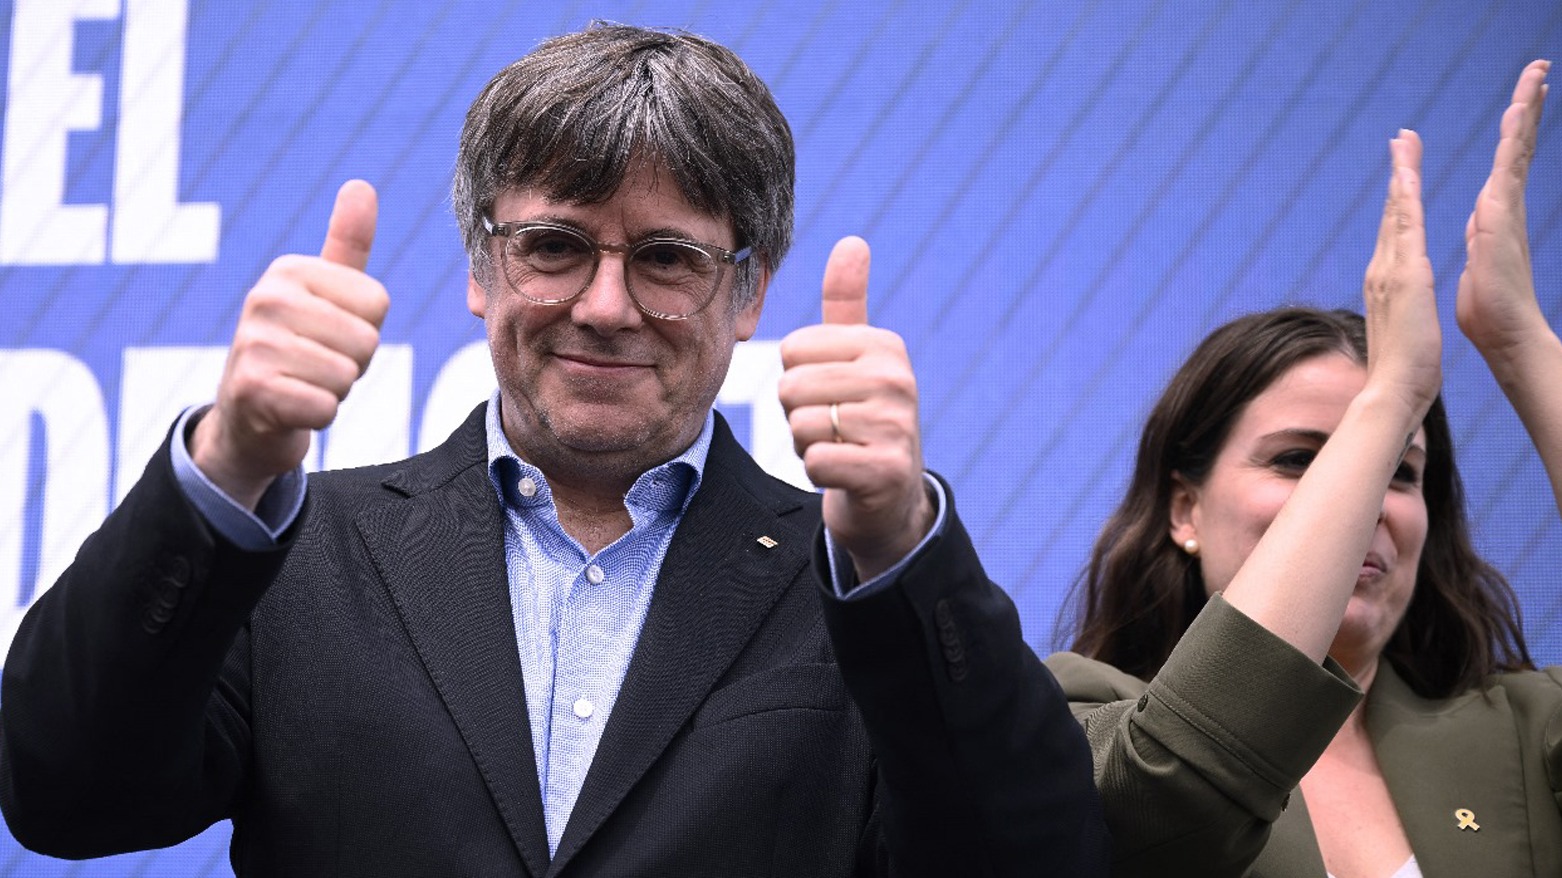 Catalan separatist leader and candidate of Junts per Catalunya - JxCat political party, Carles Puigdemont. (Photo: AFP)